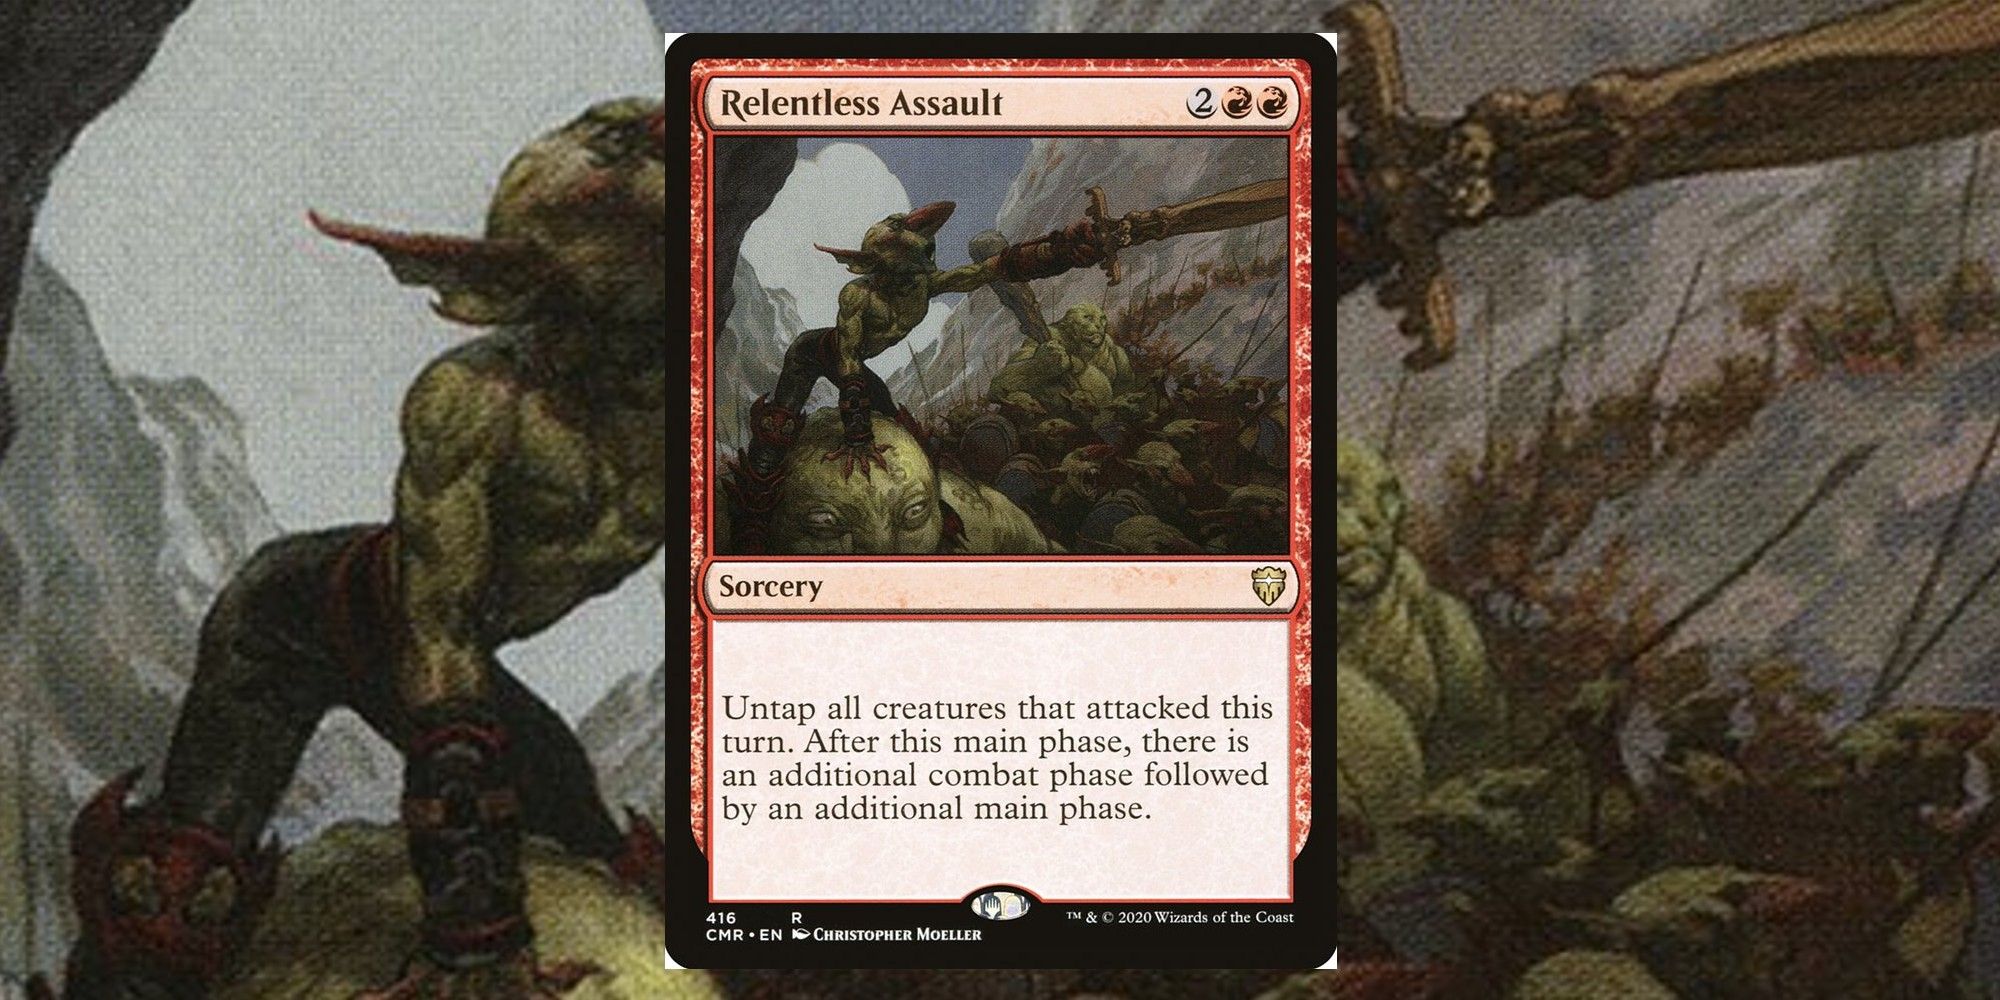 Image of the Relentless Assault card in Magic: The Gathering, with art by Christopher Moeller